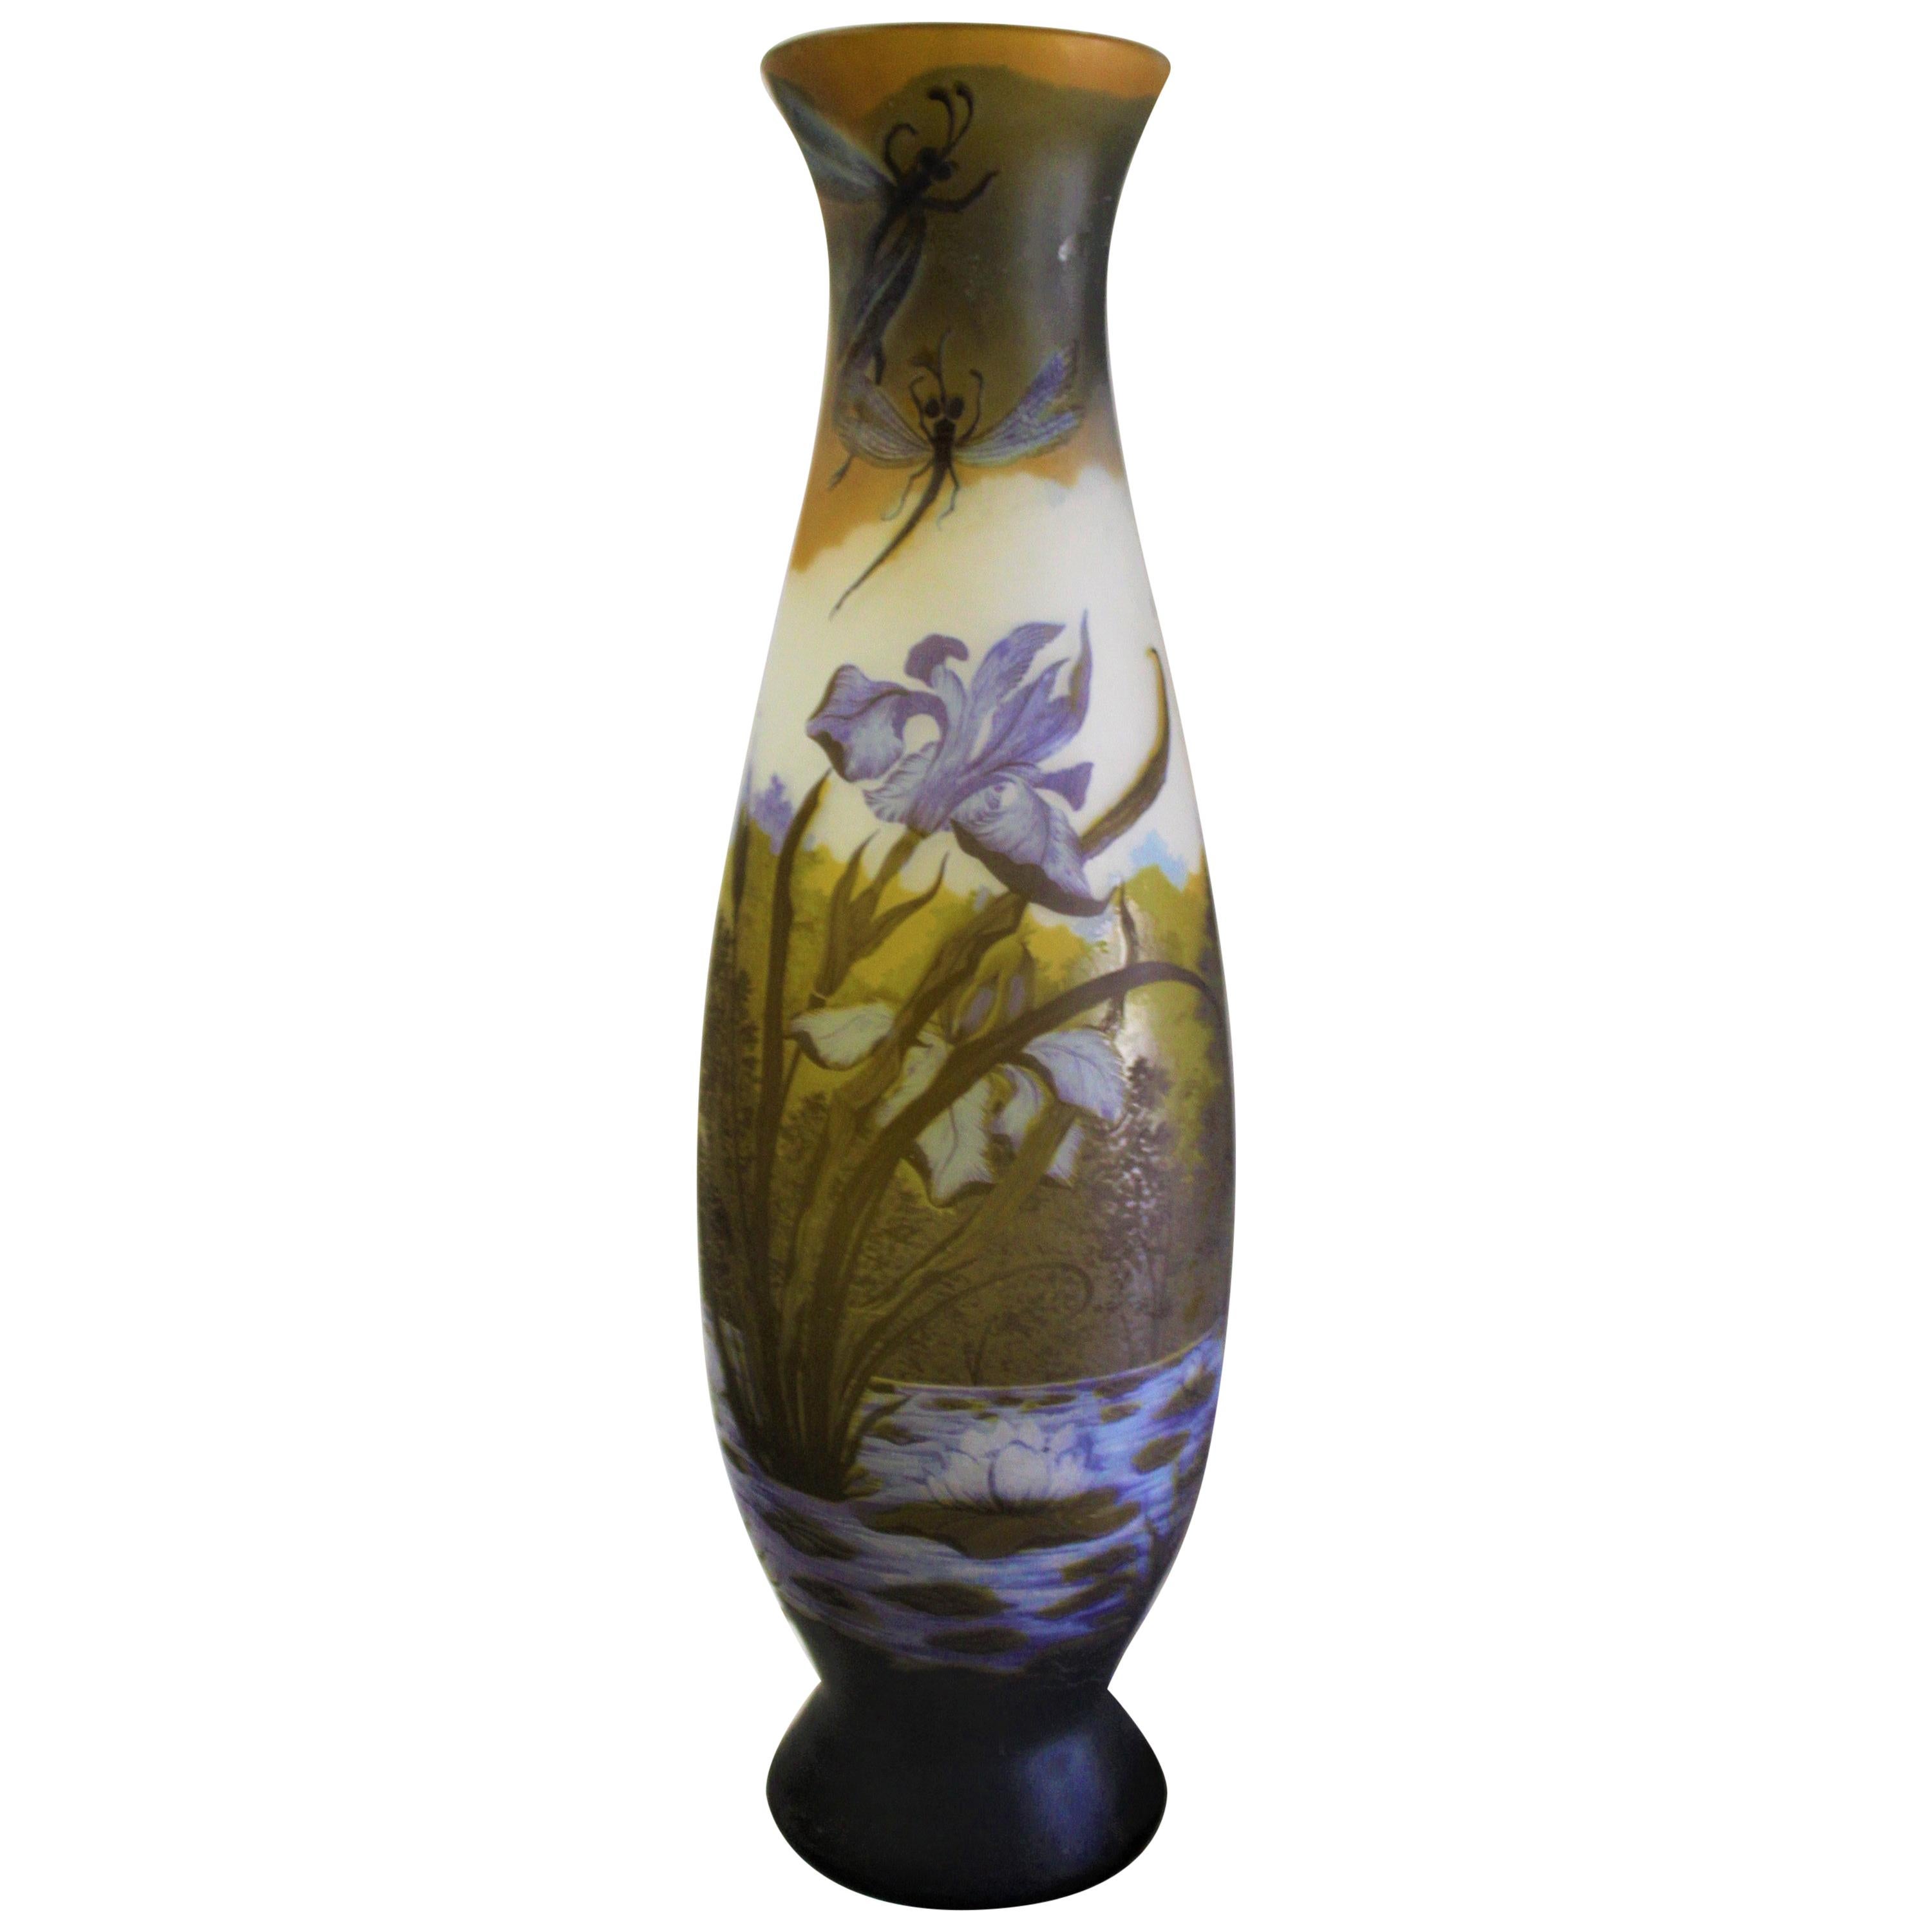 Art Nouveau Style, Extra Large Glass Vase After Galle', Very Rare For Sale